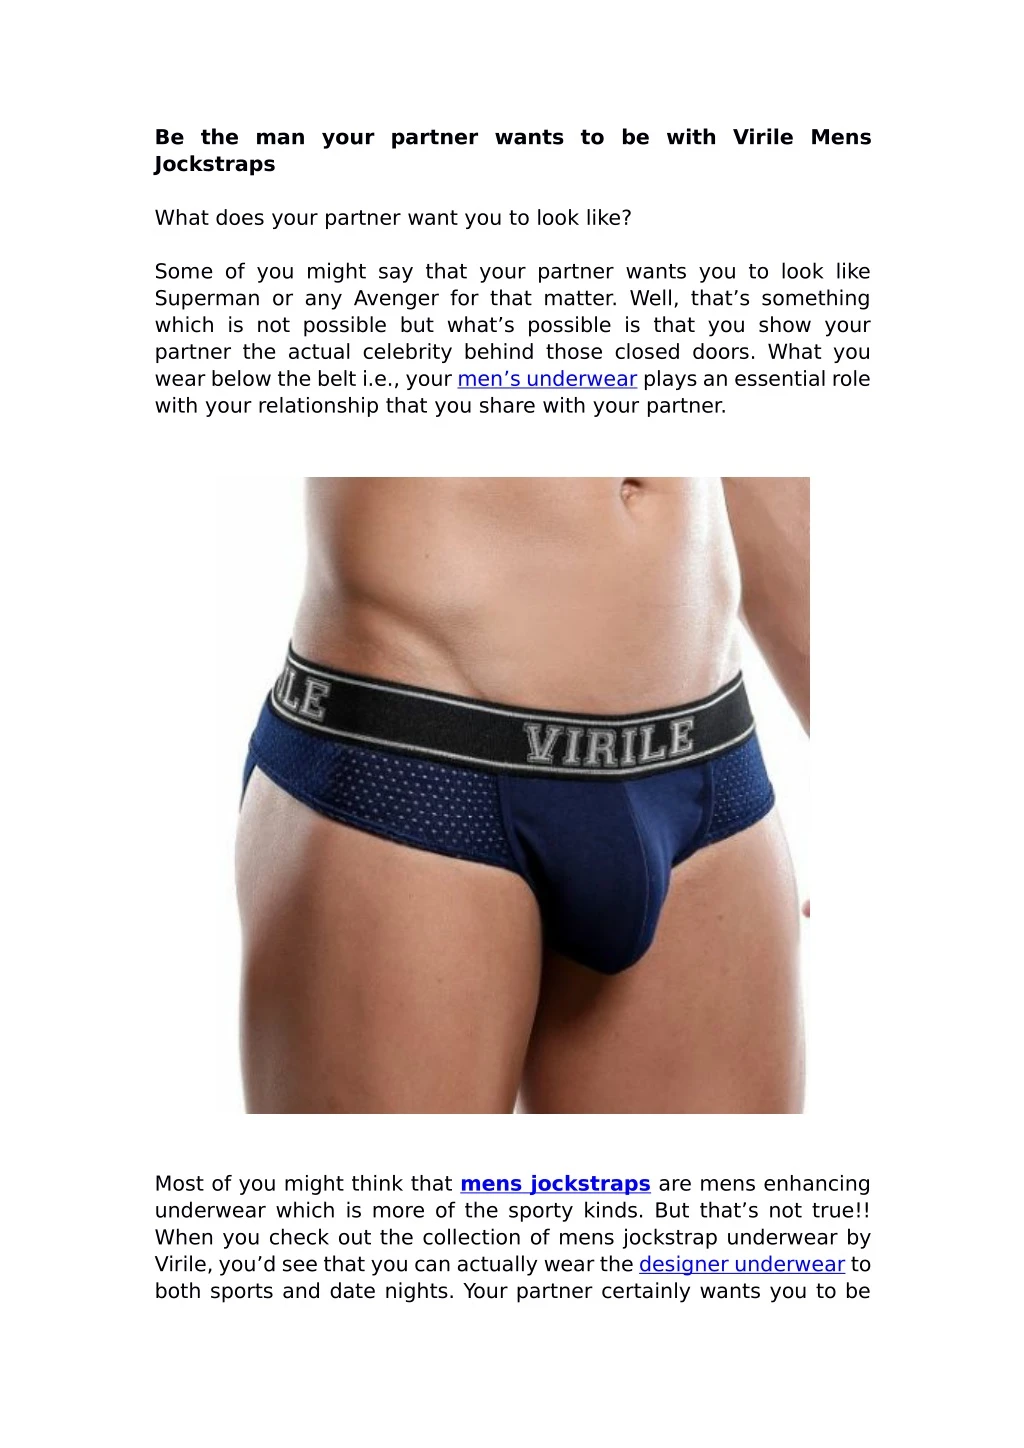 be the man your partner wants to be with virile